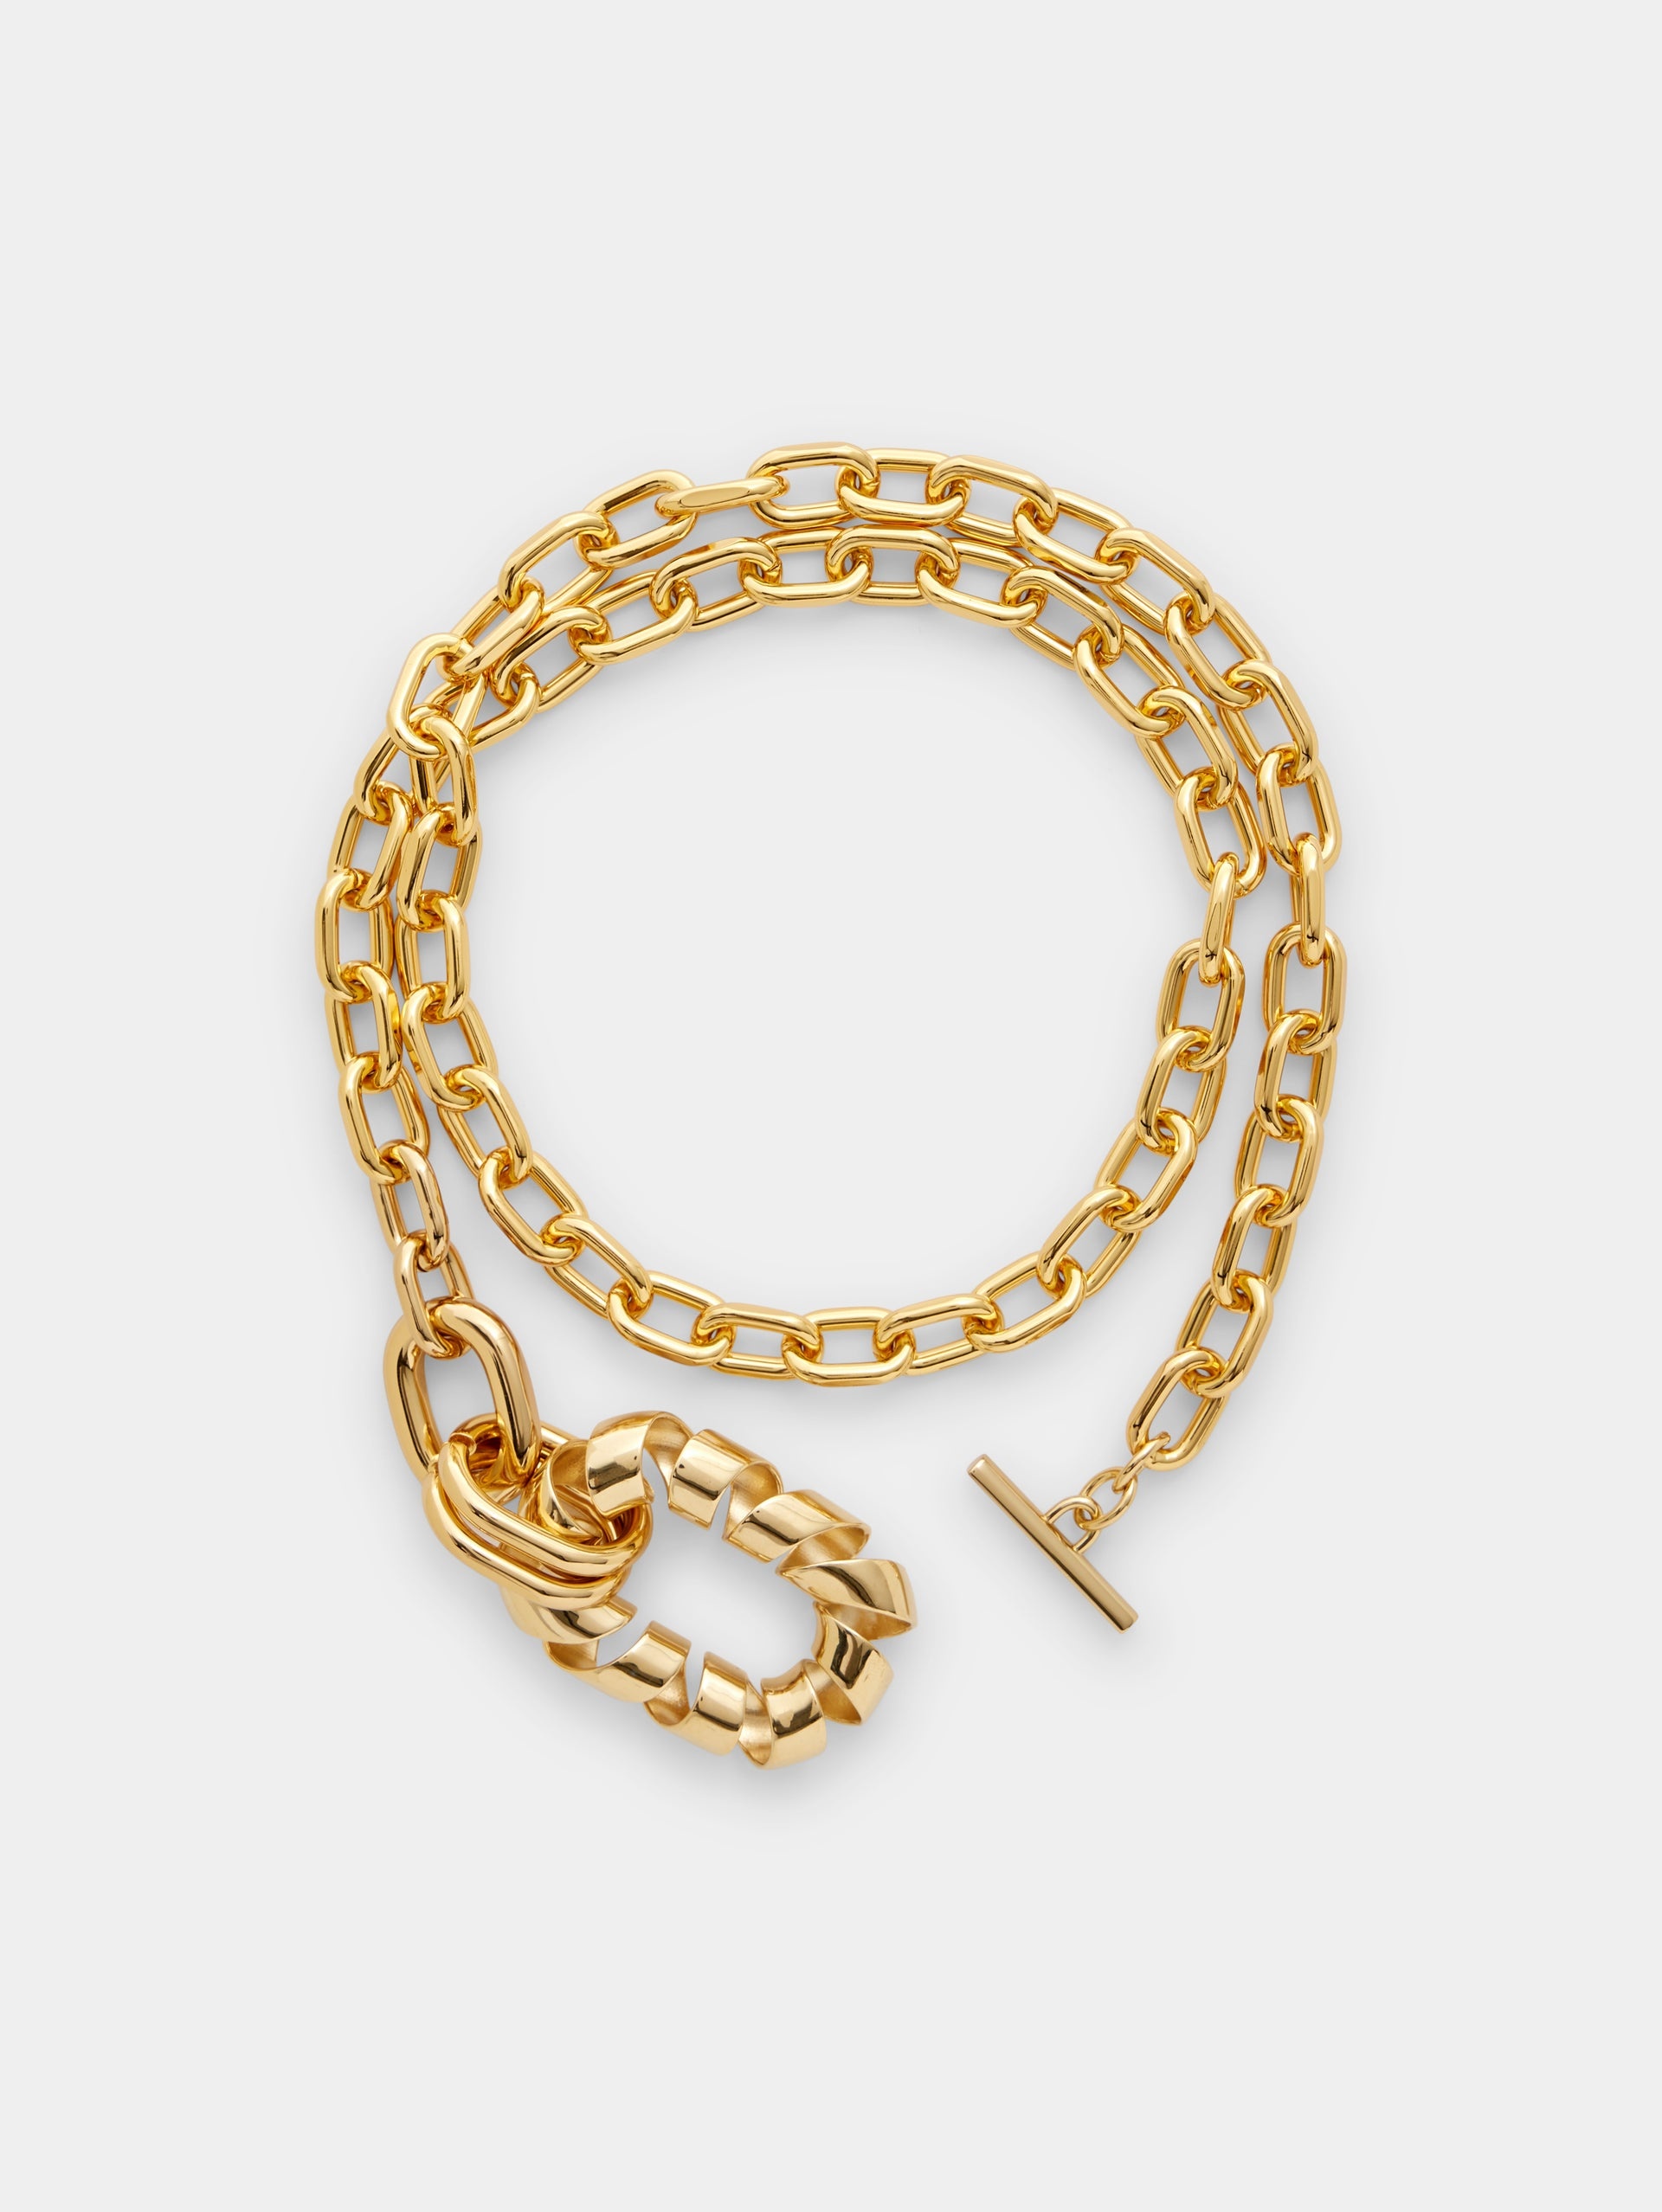 GOLD DOUBLE XL LINK TWIST NECKLACE WITH PENDANT - 2